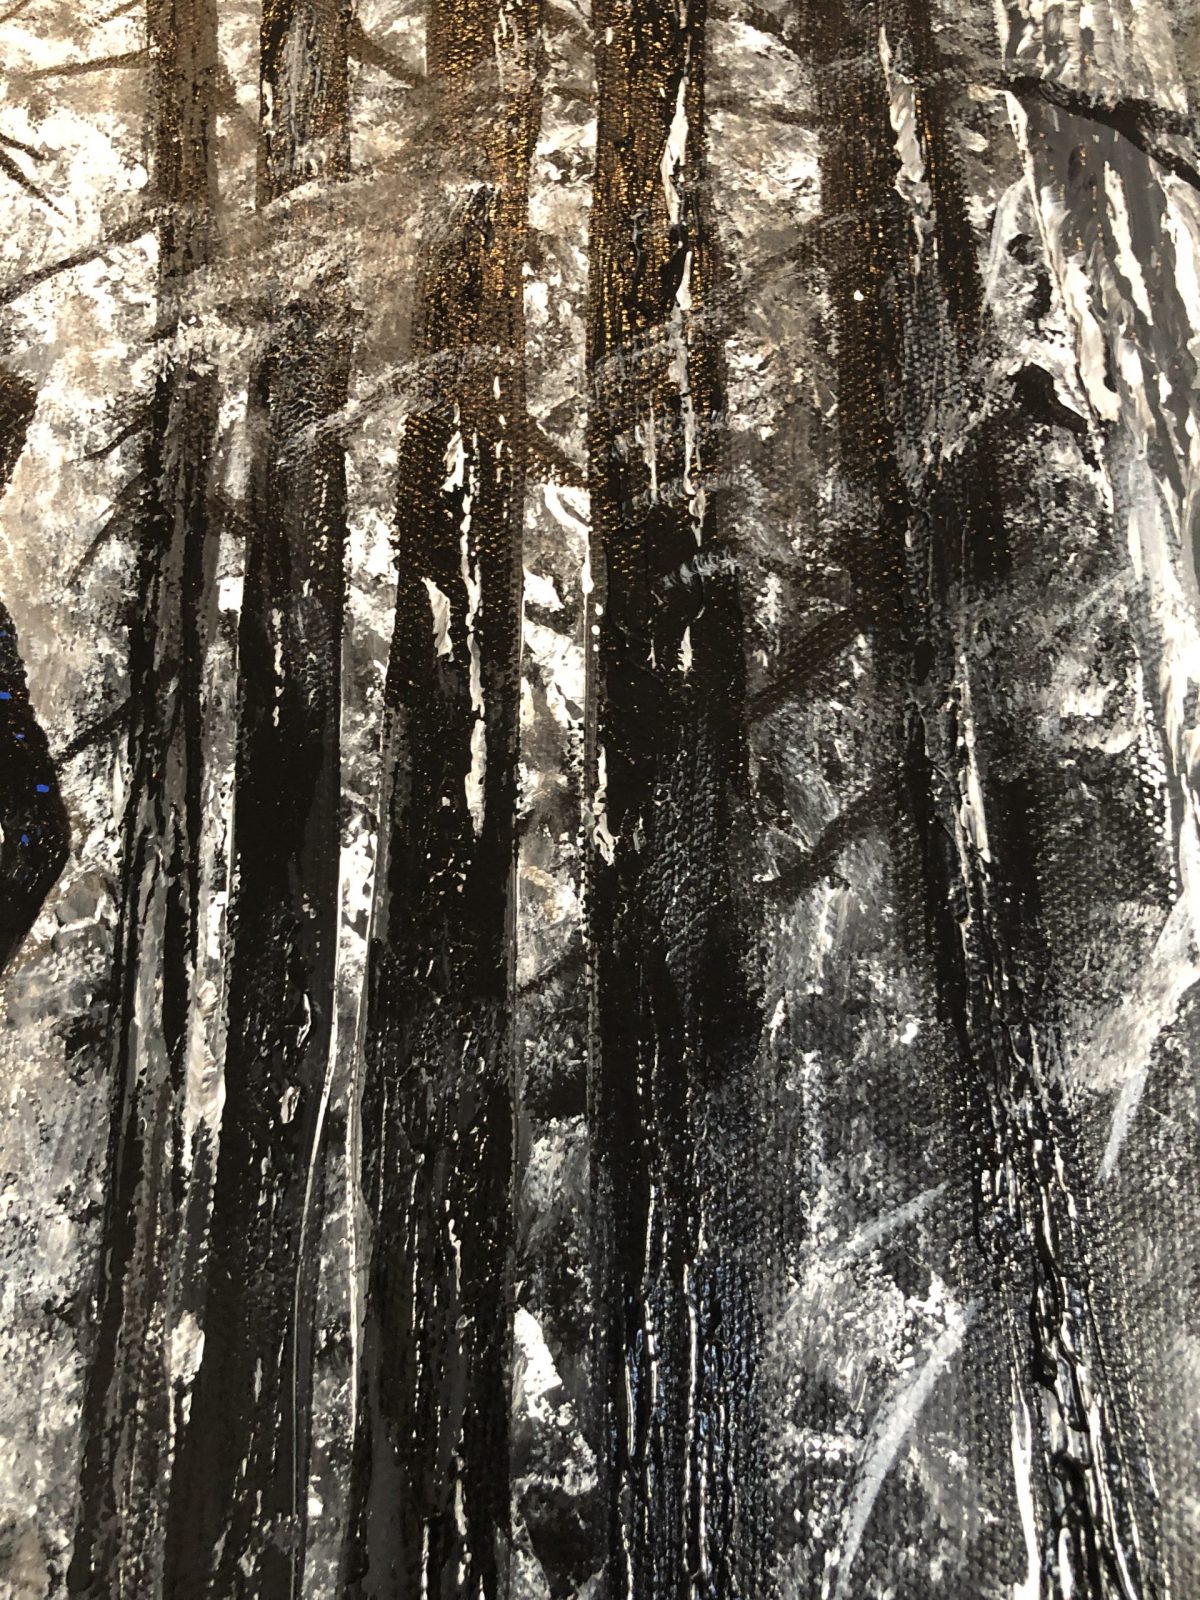 The Black Widow - the shot on the side of the canvas, forest - The Black Widow - acrylic painting made with a knife showing a black widow entering a forest in black and white